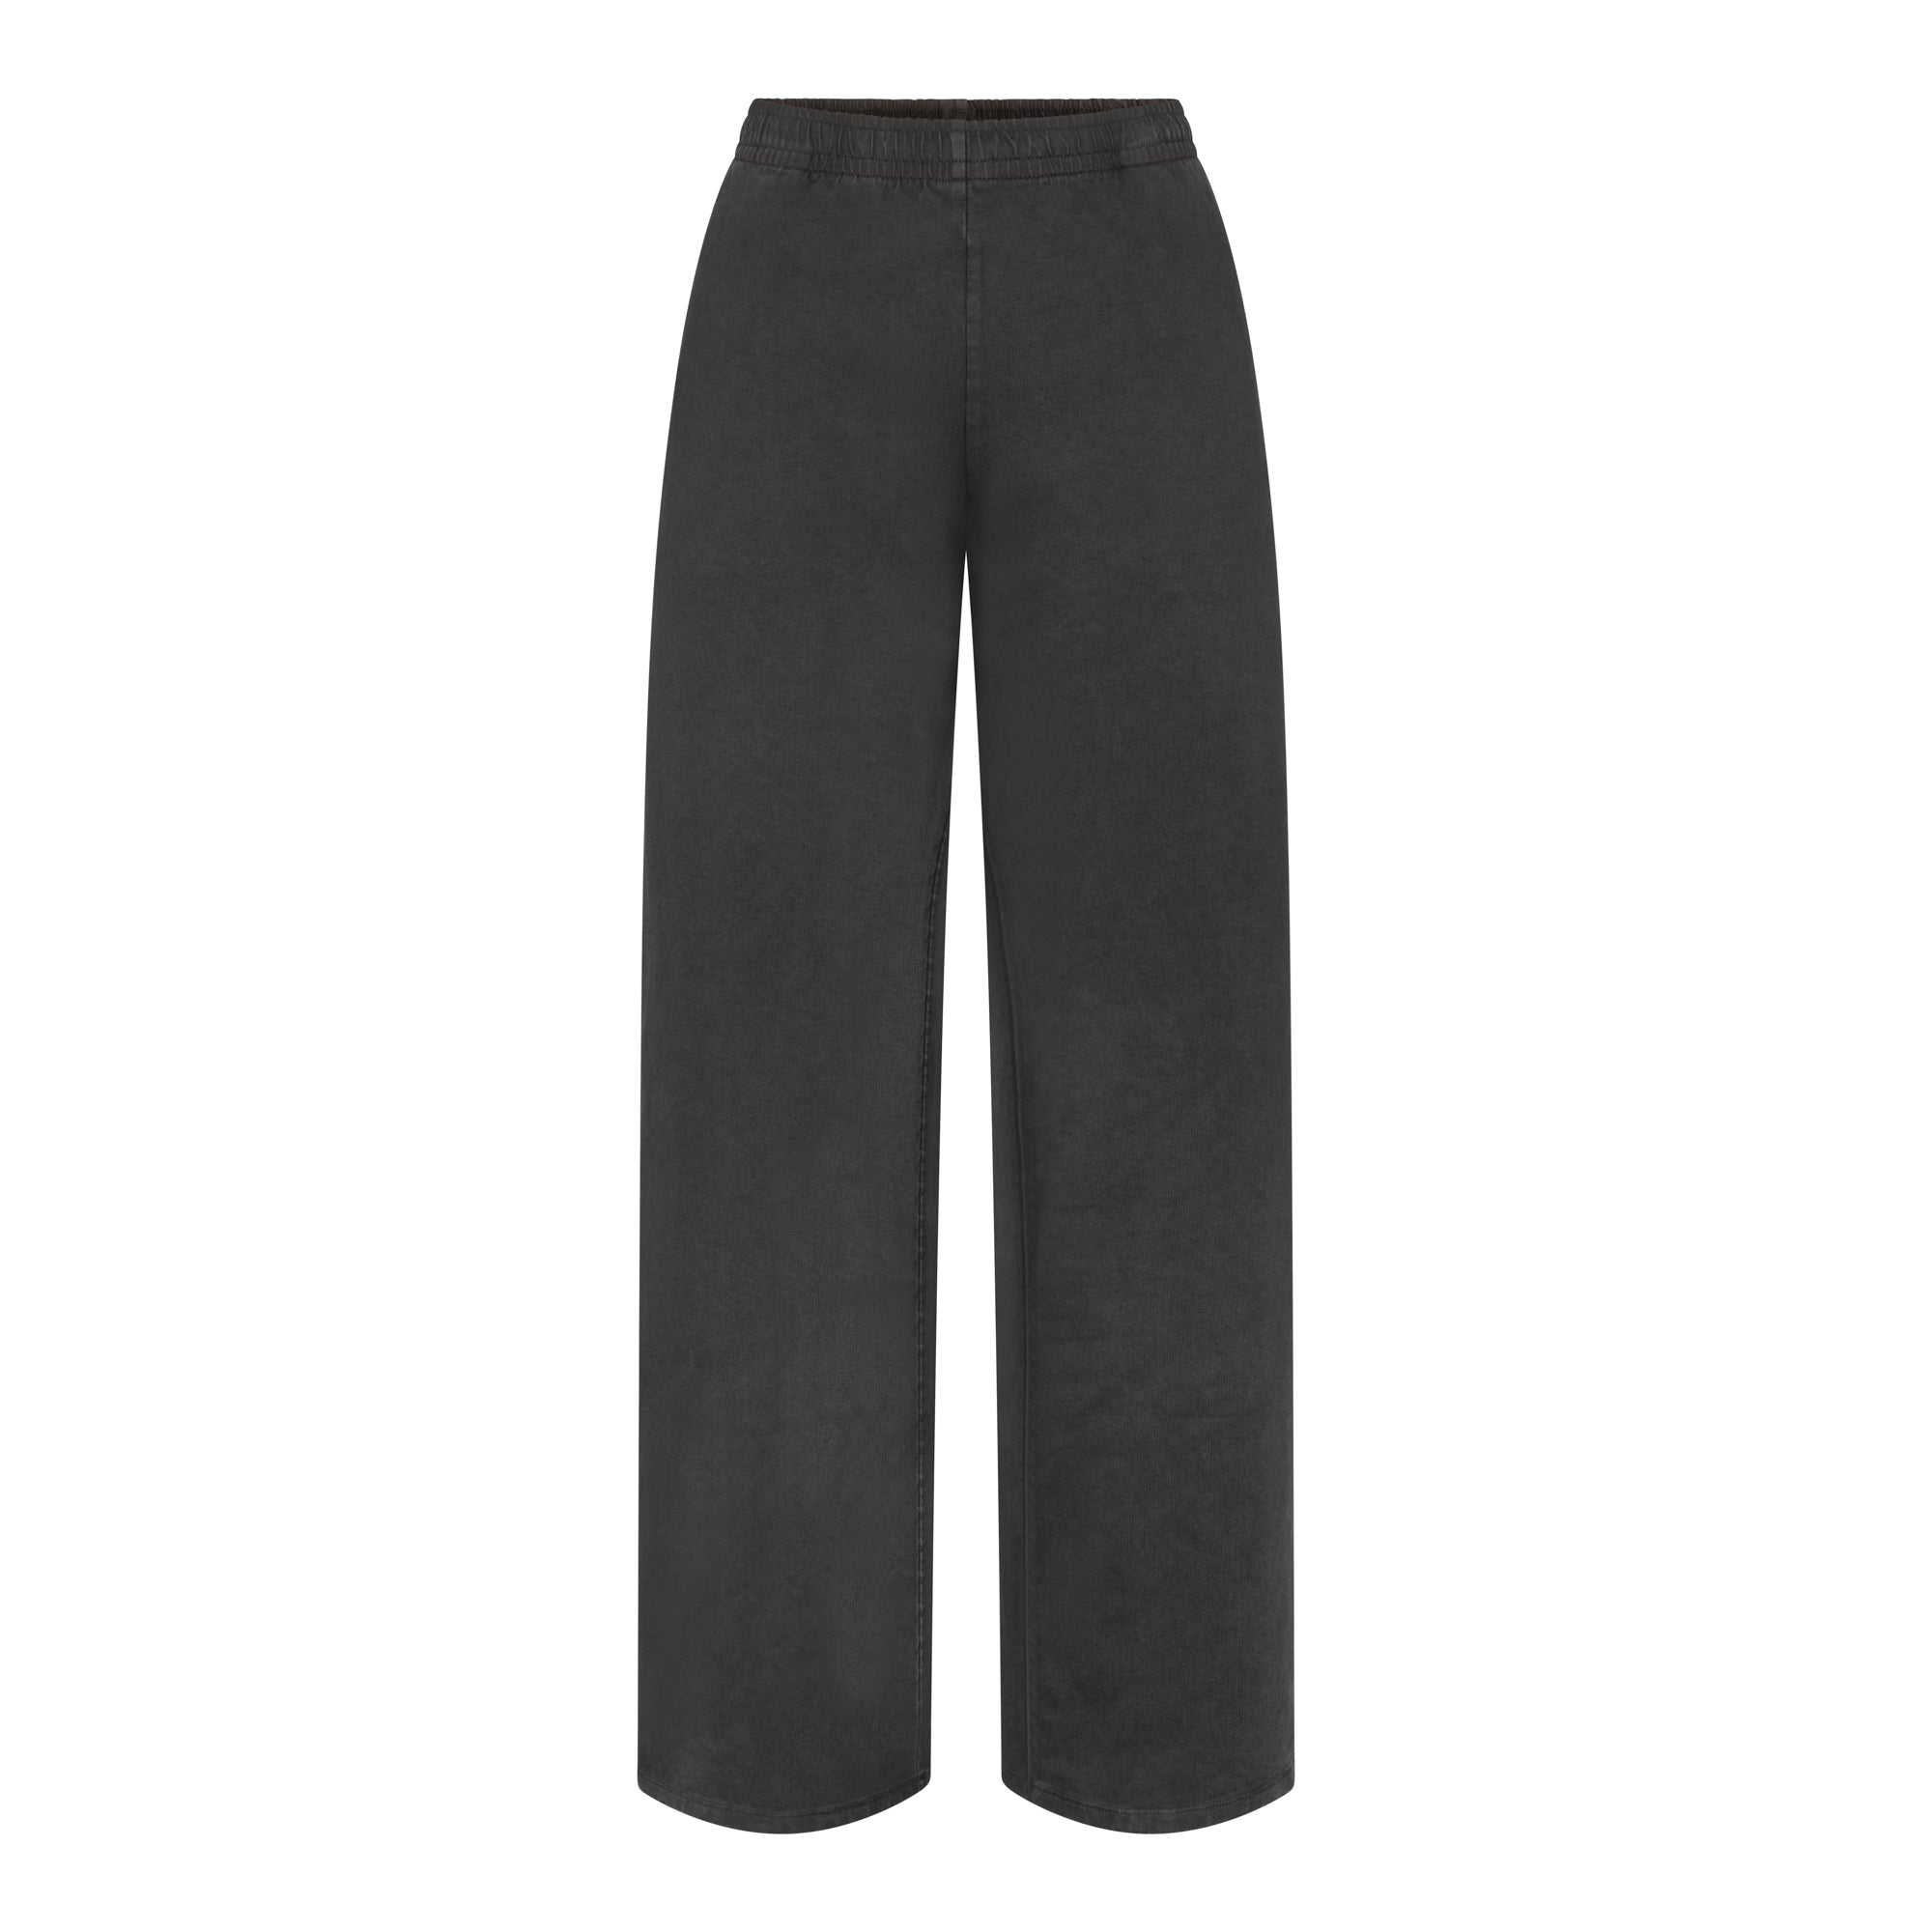 OUTDOOR JERSEY PANT | WASHED ONYX - OUTDOOR JERSEY PANT | WASHED ONYX